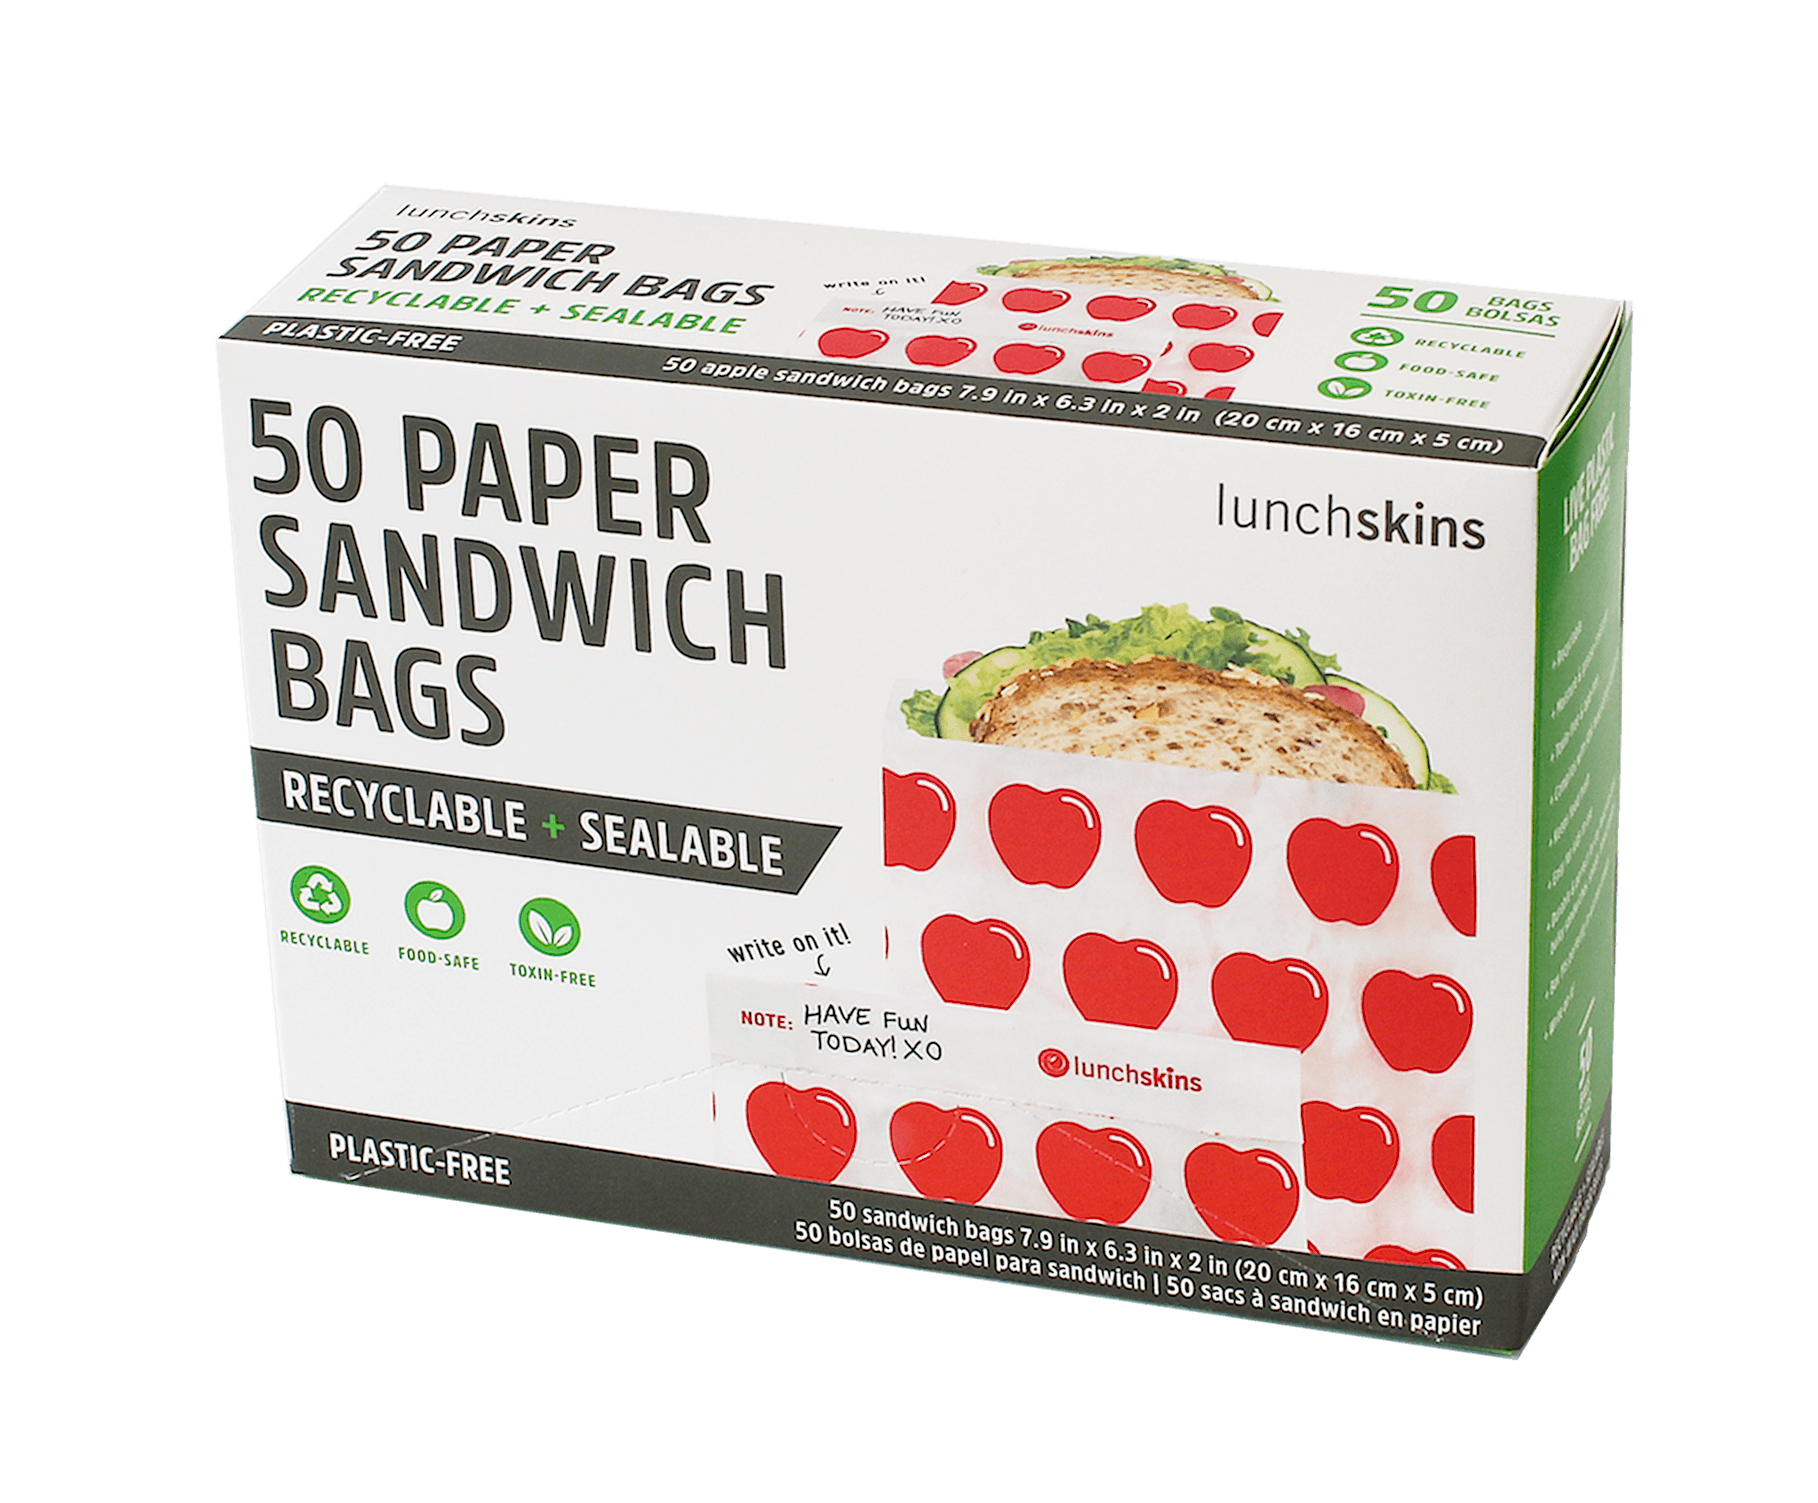 Recyclable + Sealable Non-Wax Paper Sandwich Bags w/Closure Strip (50 Count)